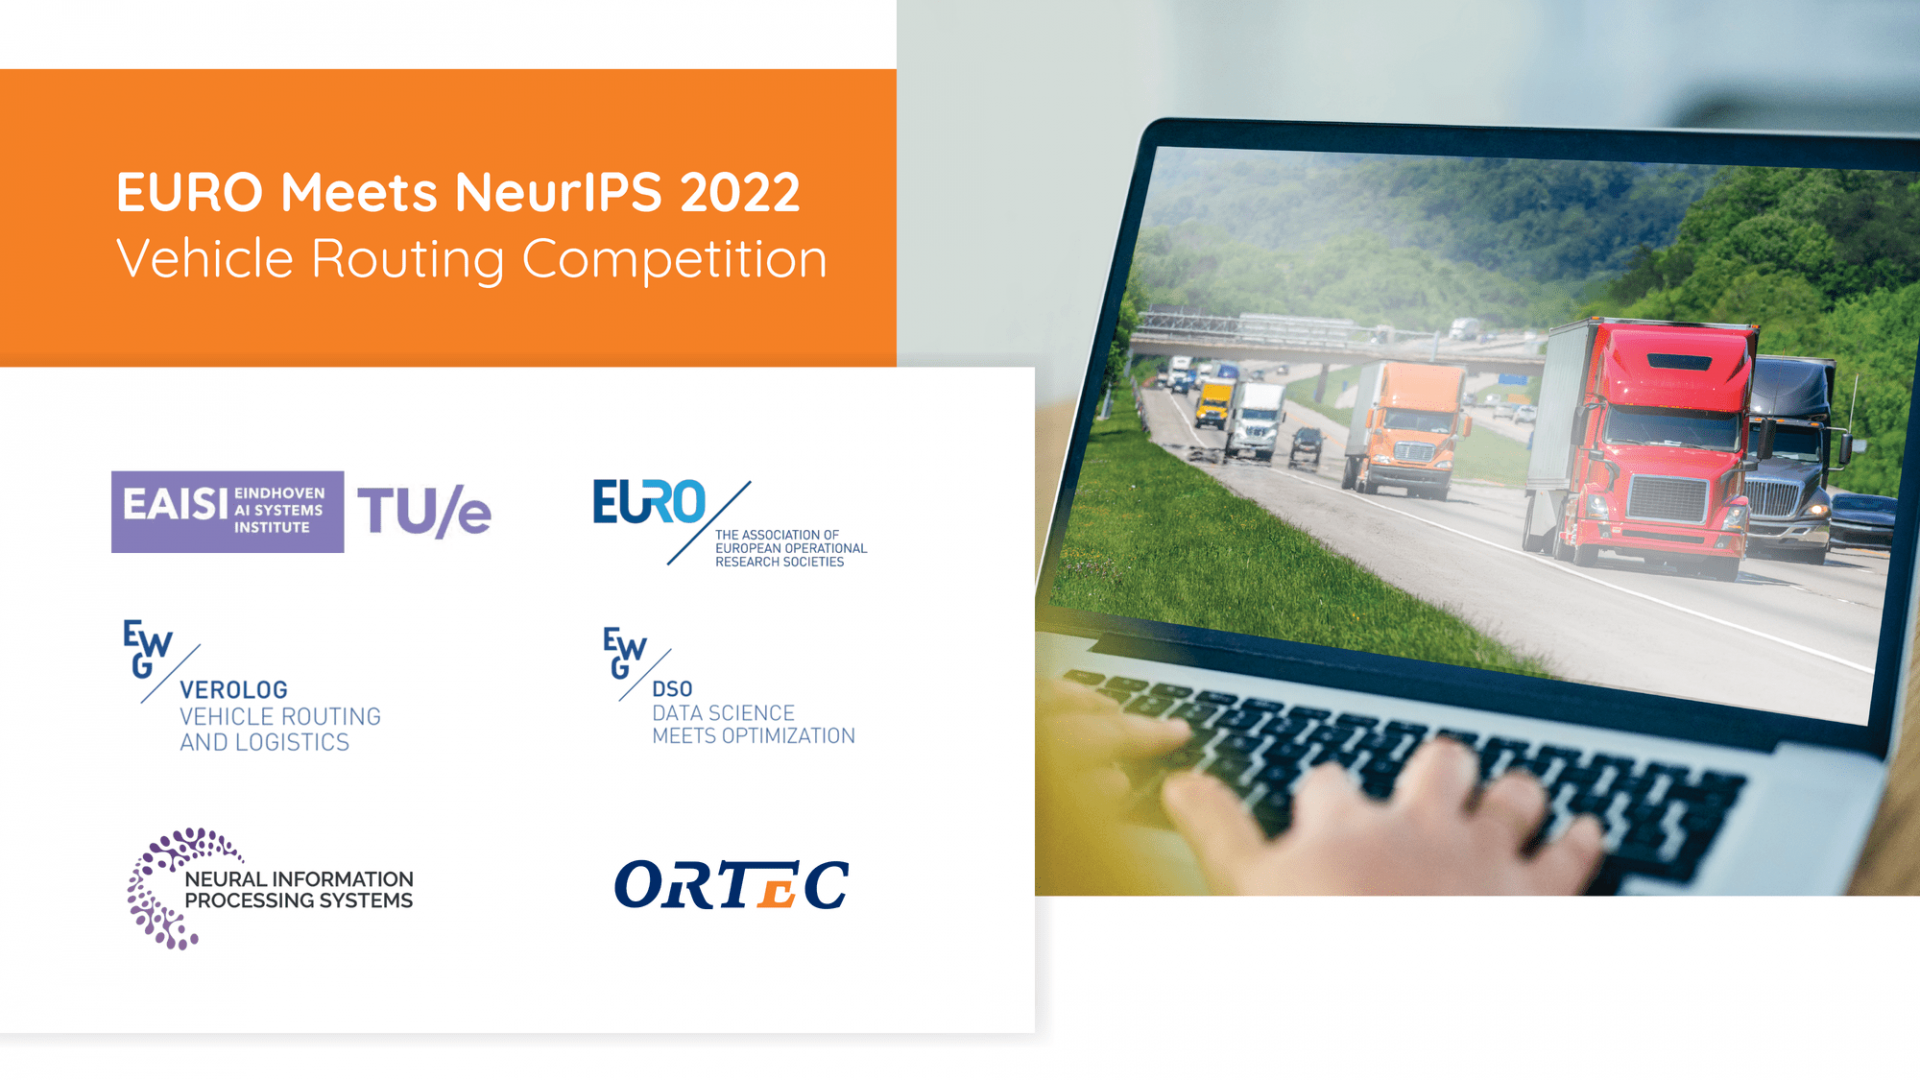 EURO Meets NeurIPS 2022 Vehicle Routing Competition